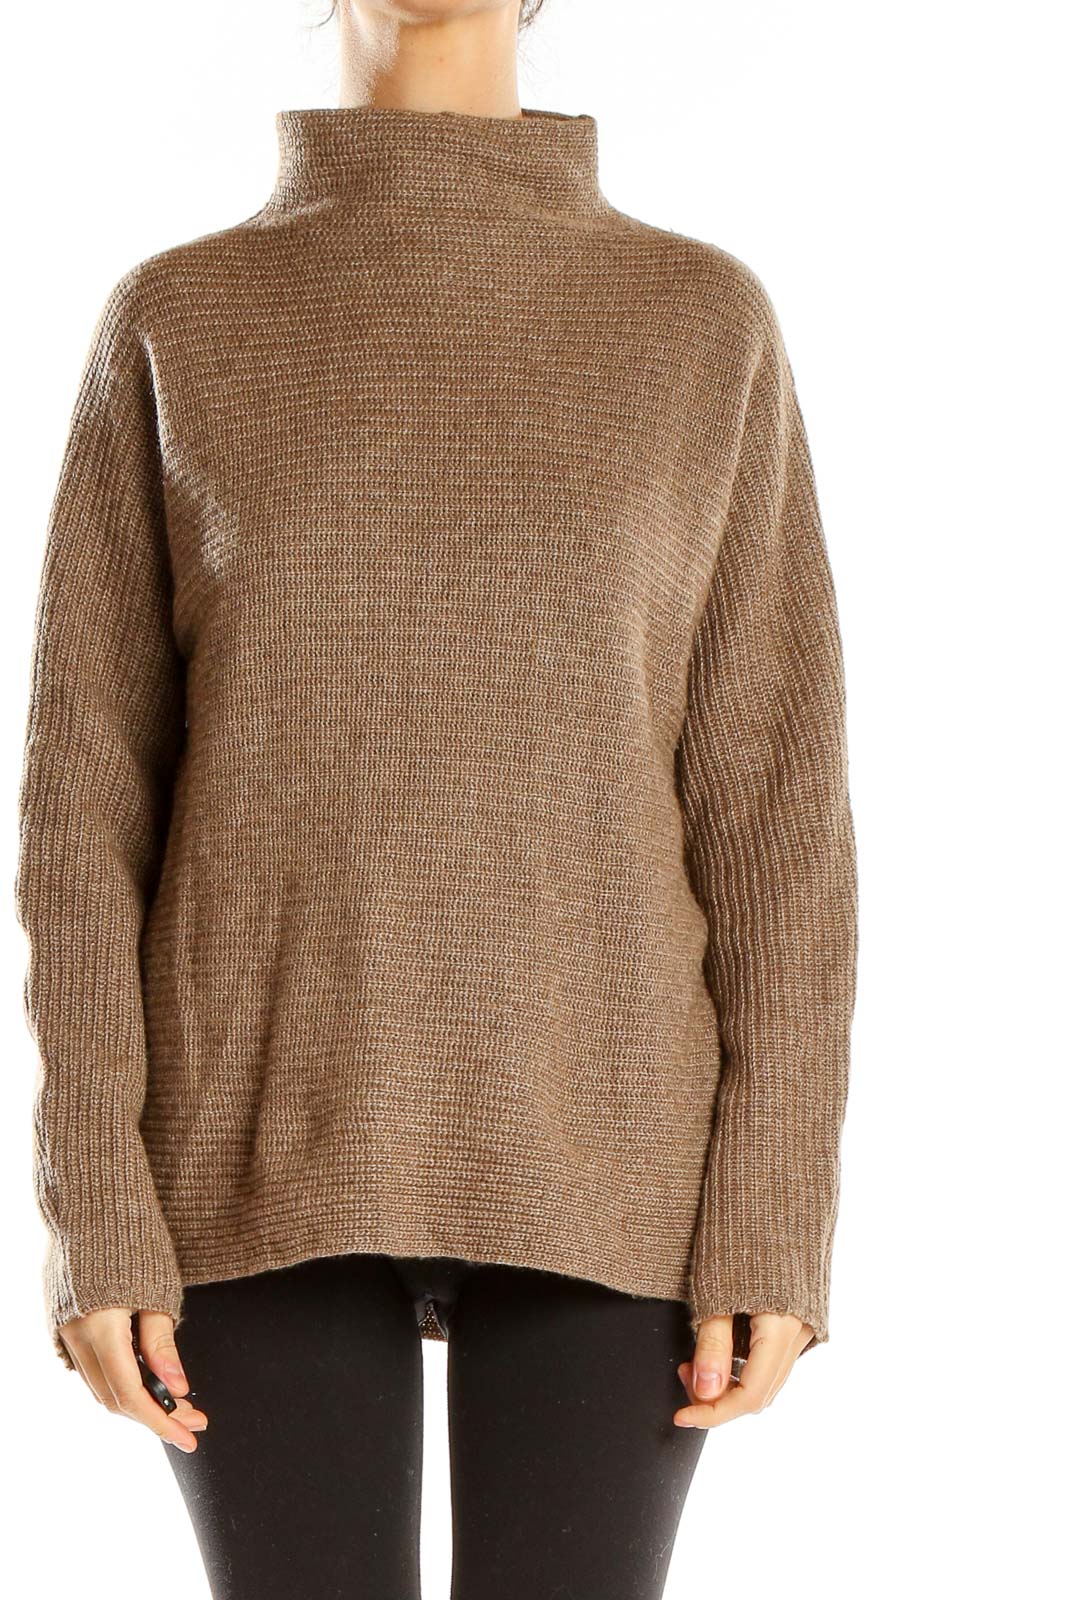 Brown Casual Highneck Sweater Front